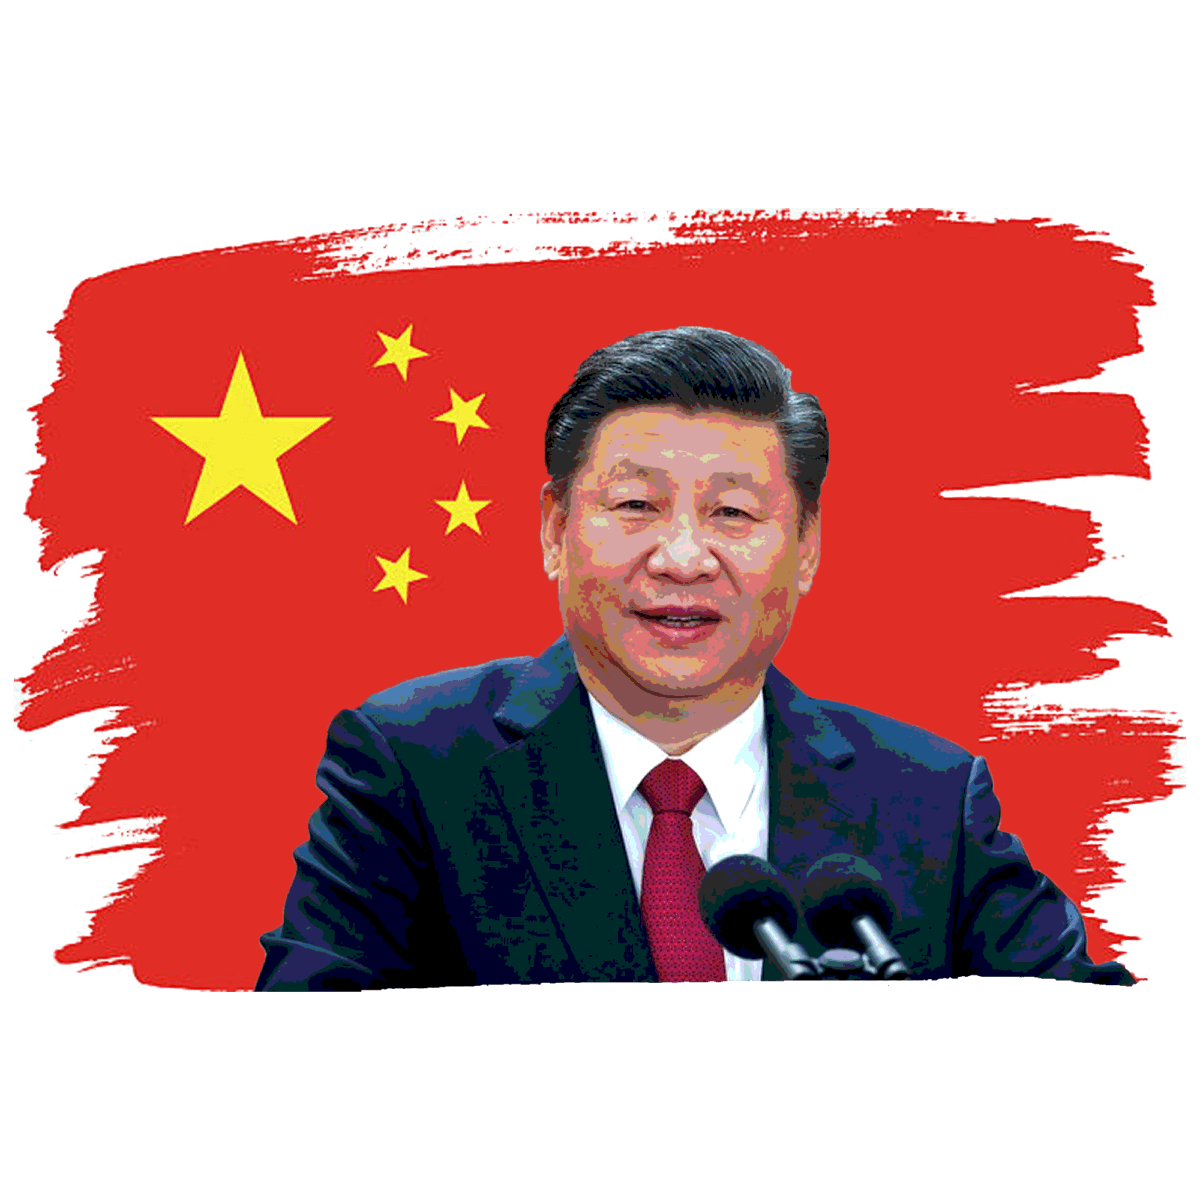 A photo of Xi Jinping with a flag of China behind them